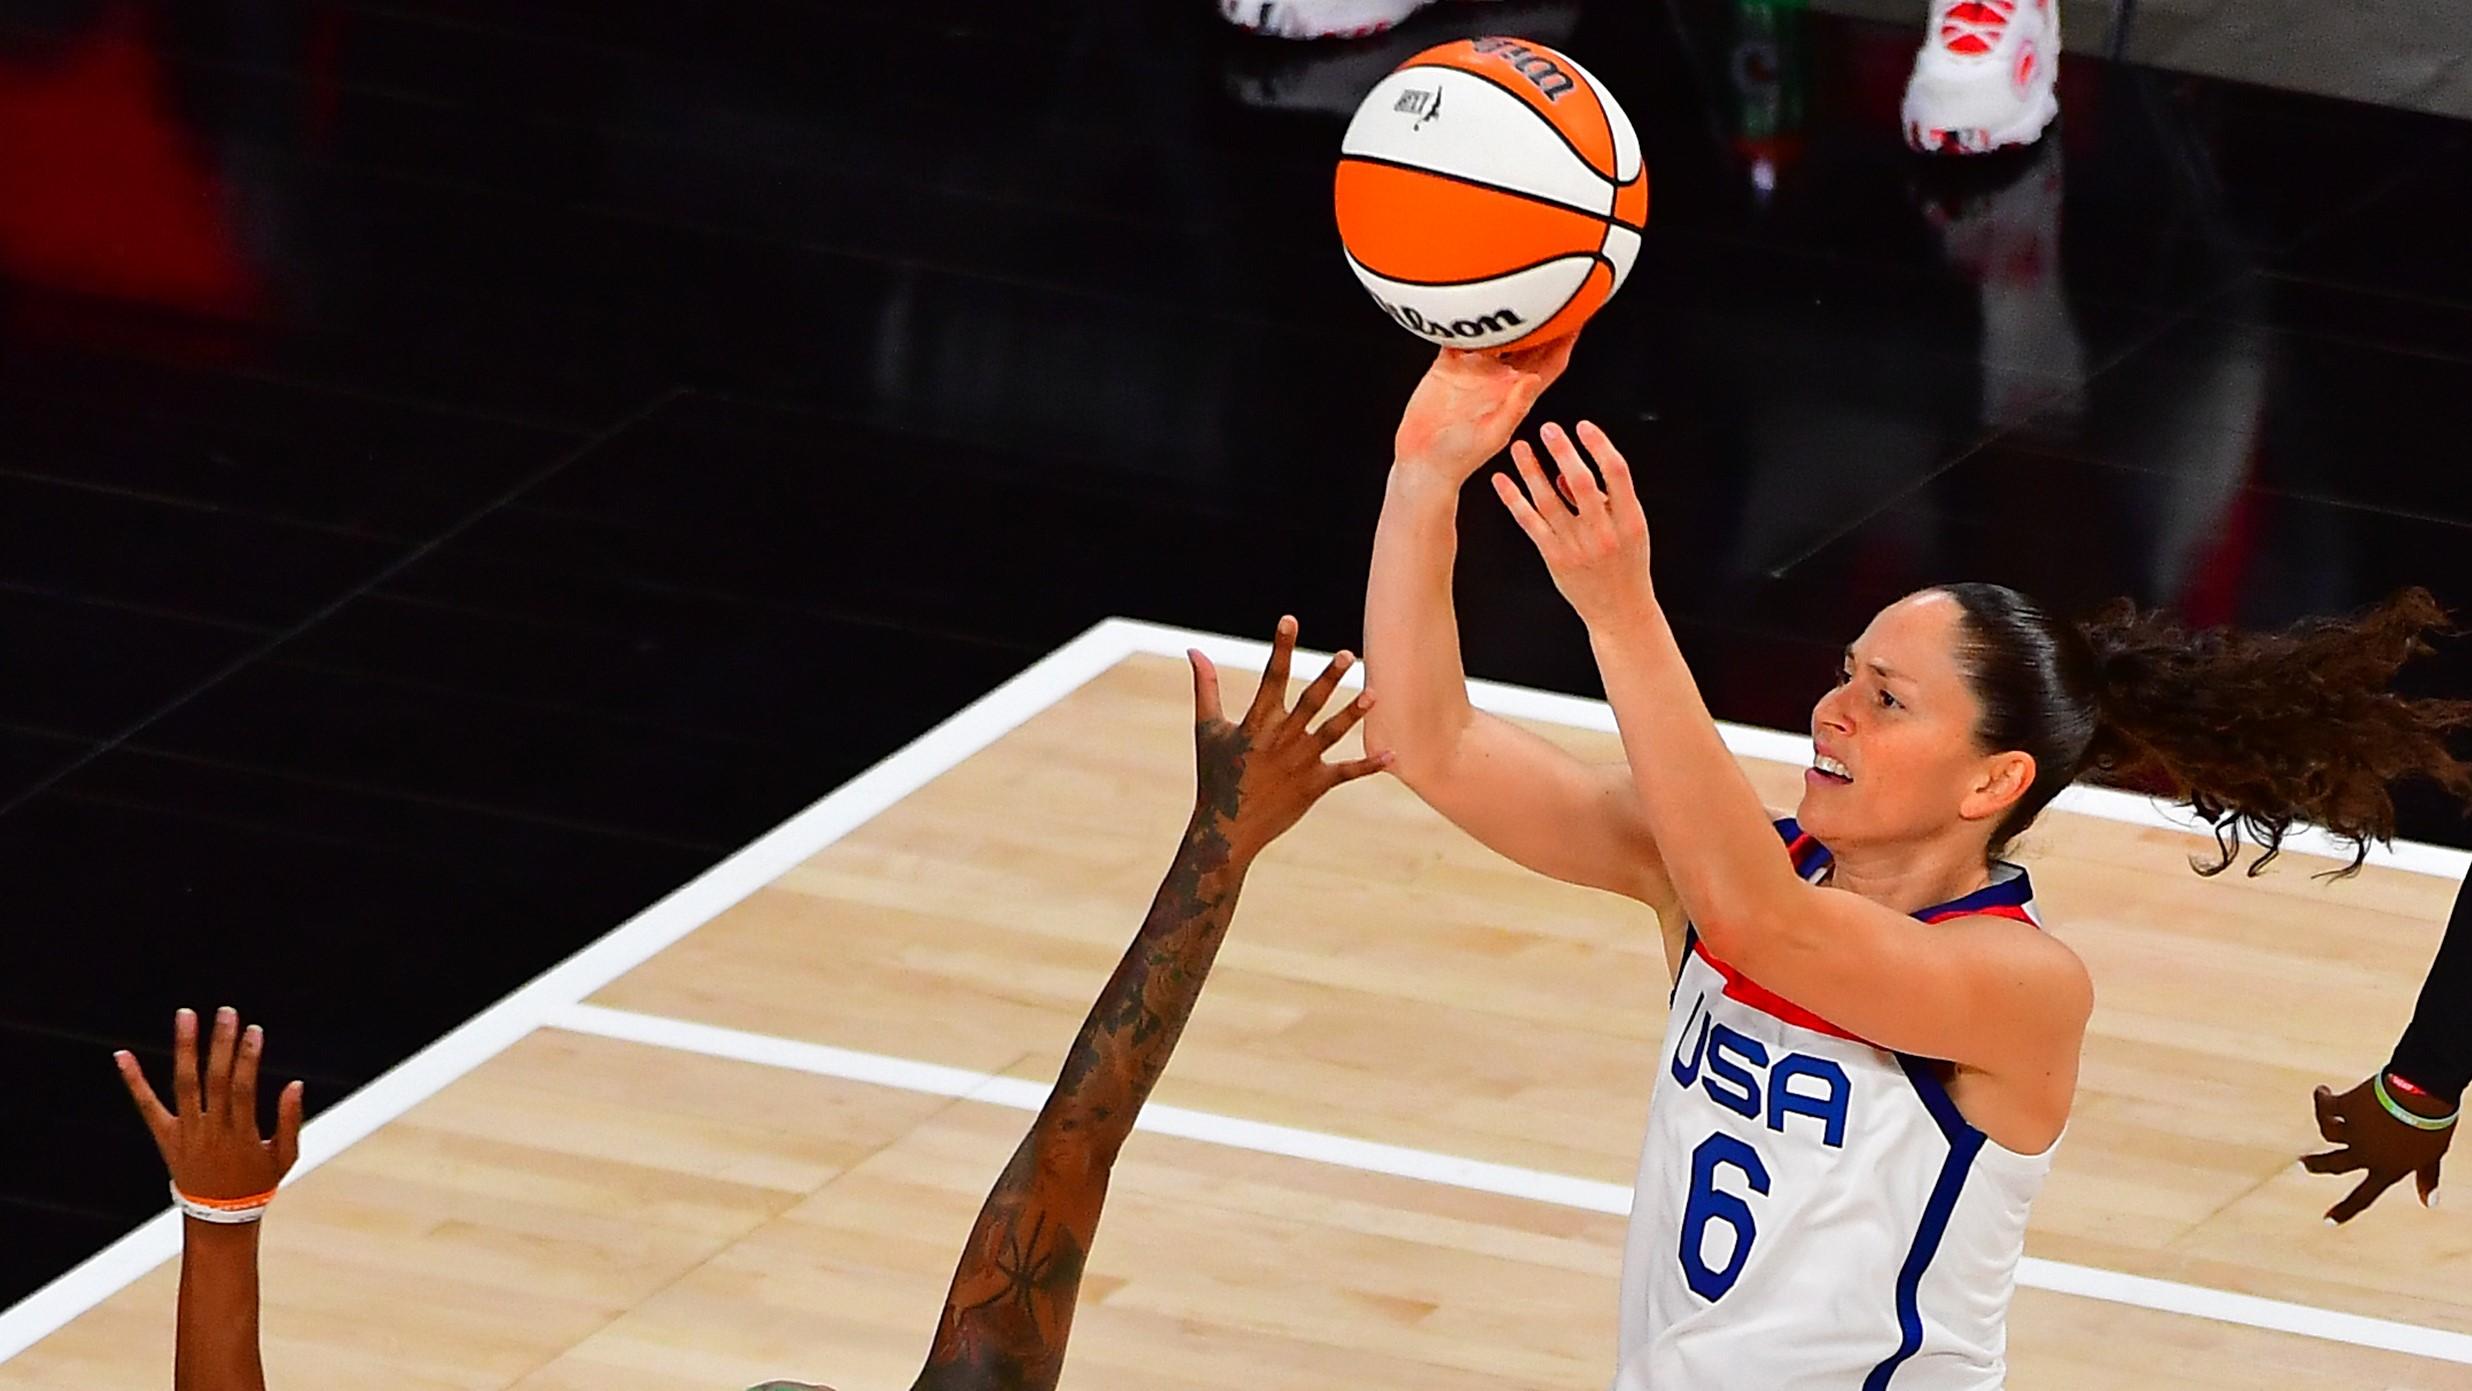 Team USA guard Sue Bird (6) shoots against WNBA All Star guard Courtney Williams (10) during the second quarter of the WNBA All Star Game at Michelob Ultra Arena at Mandalay Bay Resort. / Stephen R. Sylvanie-USA TODAY Sports